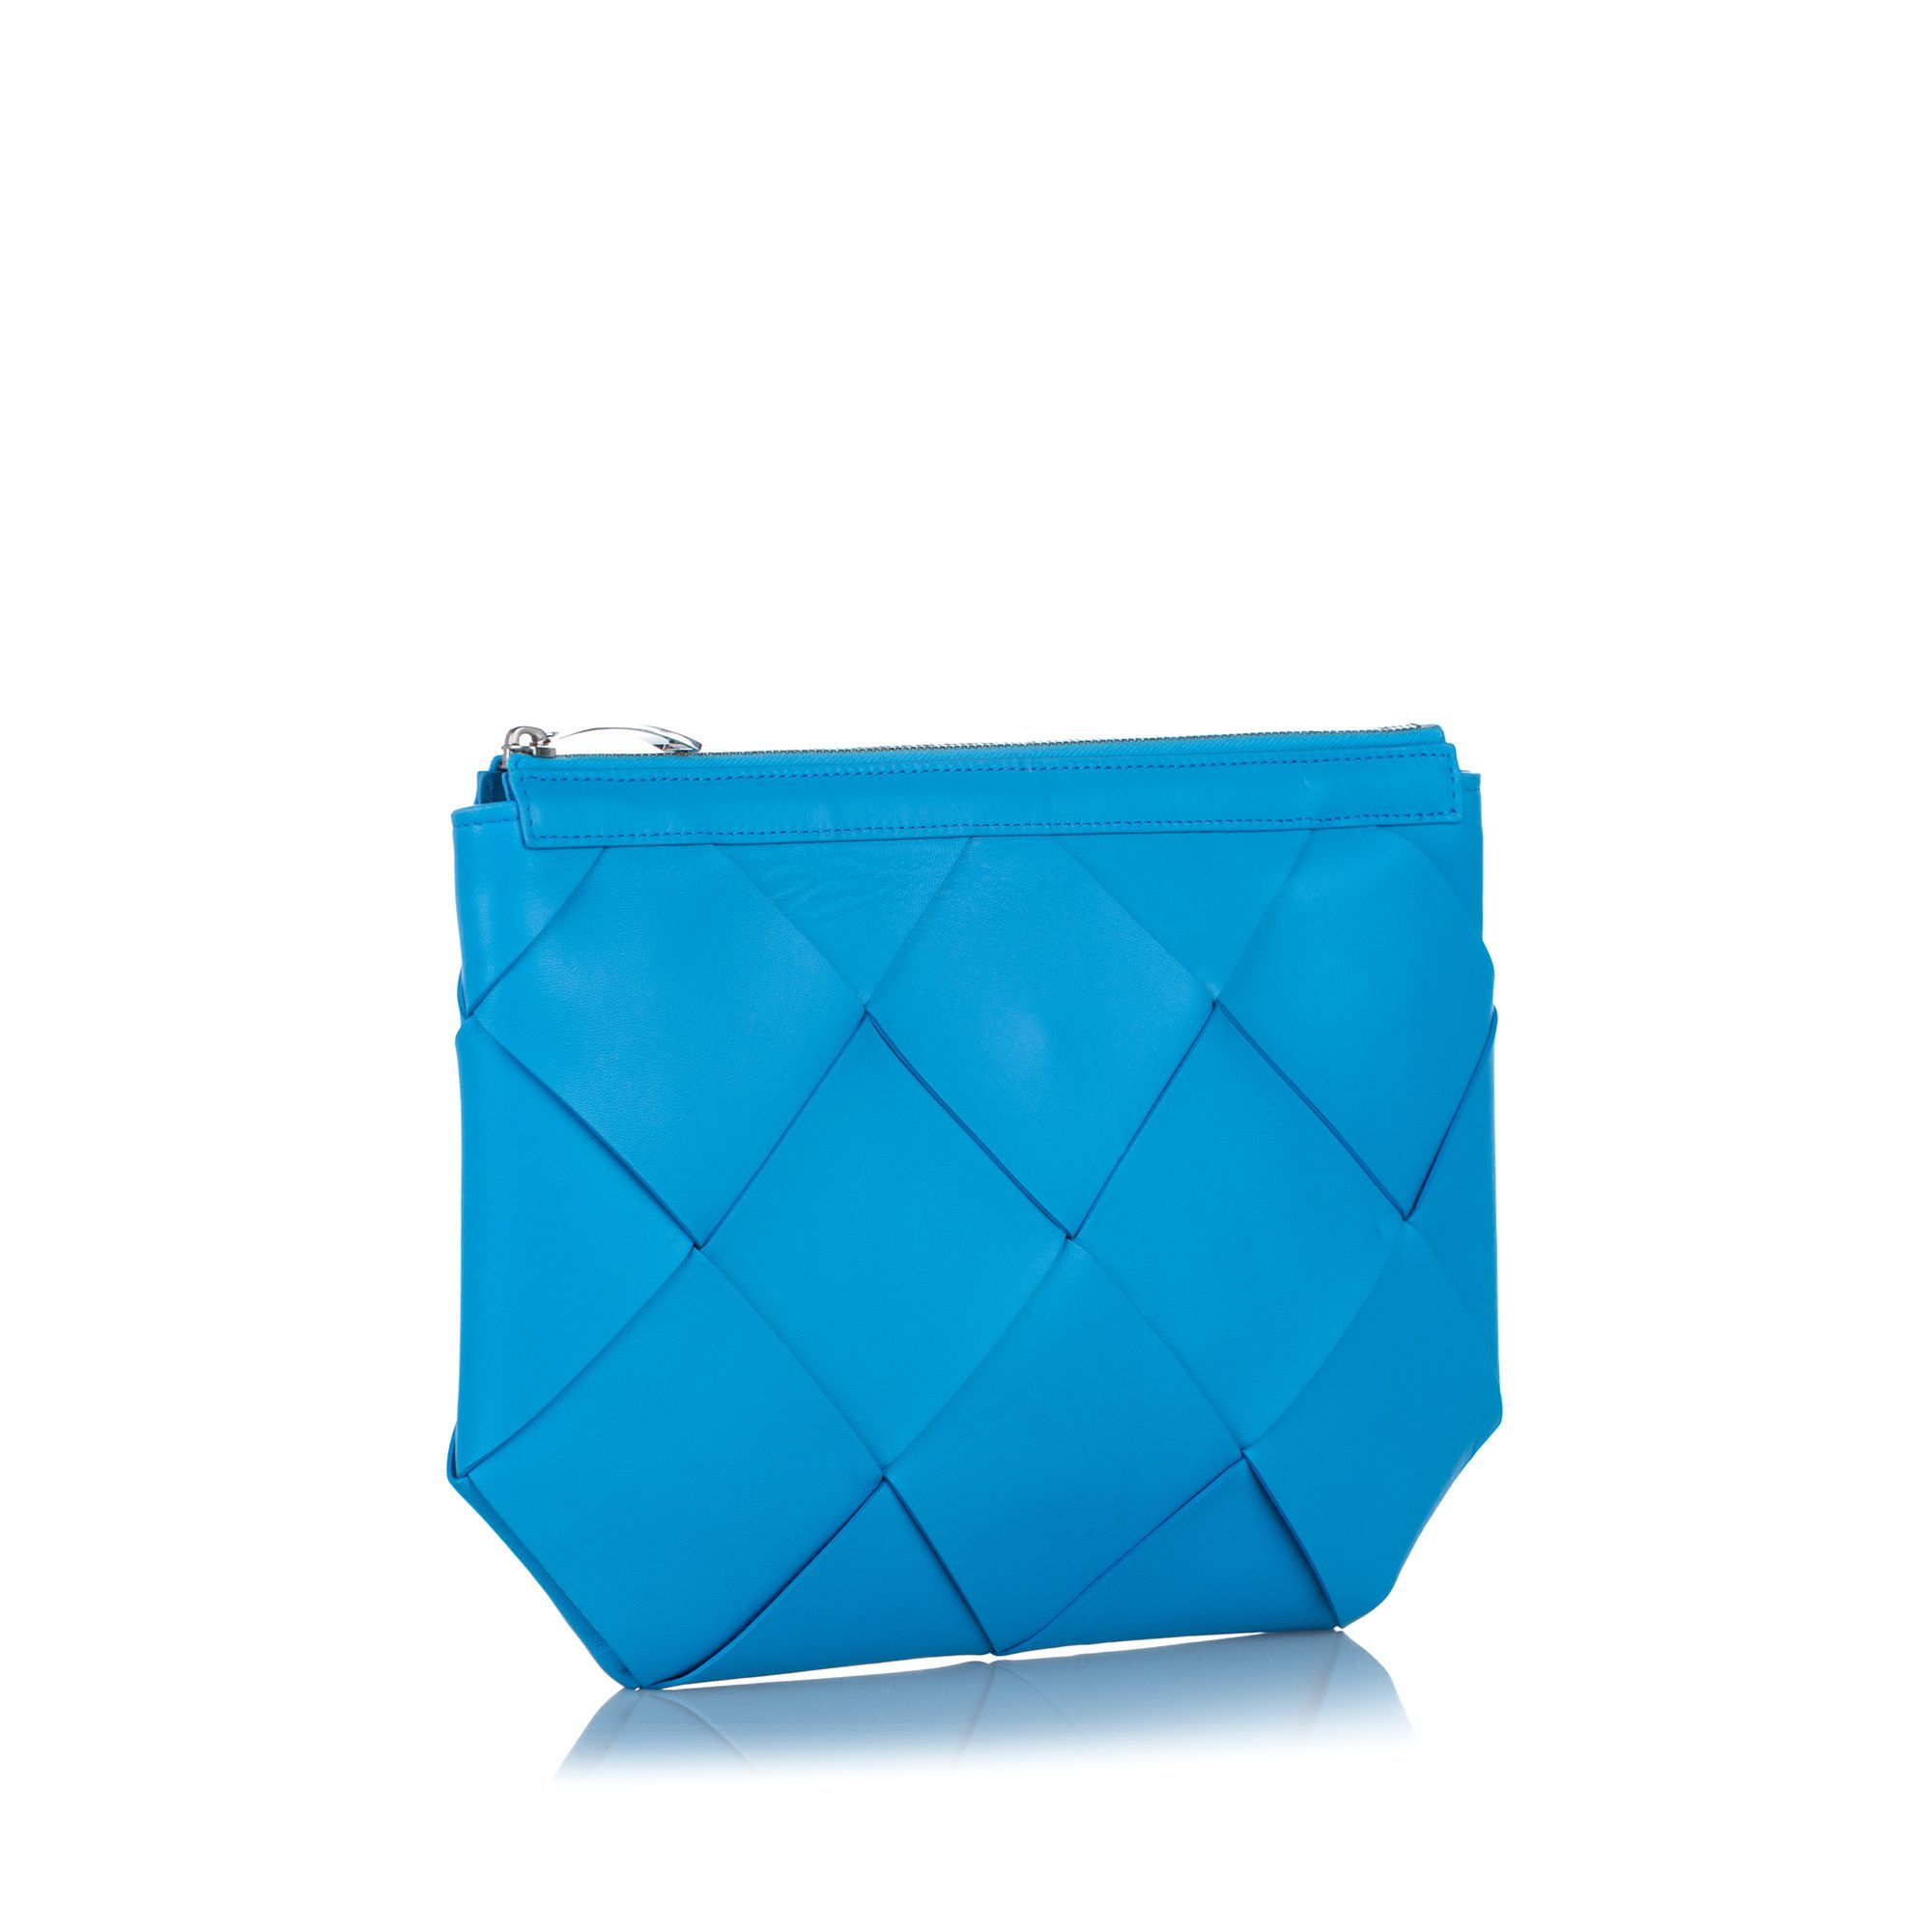 VINTAGE. RRP AS NEW. The Intrecciato clutch bag features a woven leather body and a top zip closure.
Dimensions:
Length 23cm
Width 33cm
Depth 2cm

Original Accessories: Dust Bag

Serial Number: PO1106039K
Color: Blue
Material: Leather x Calf
Country of Origin: ITALY
Boutique Reference: SSU102505K1342


Product Rating: GoodCondition